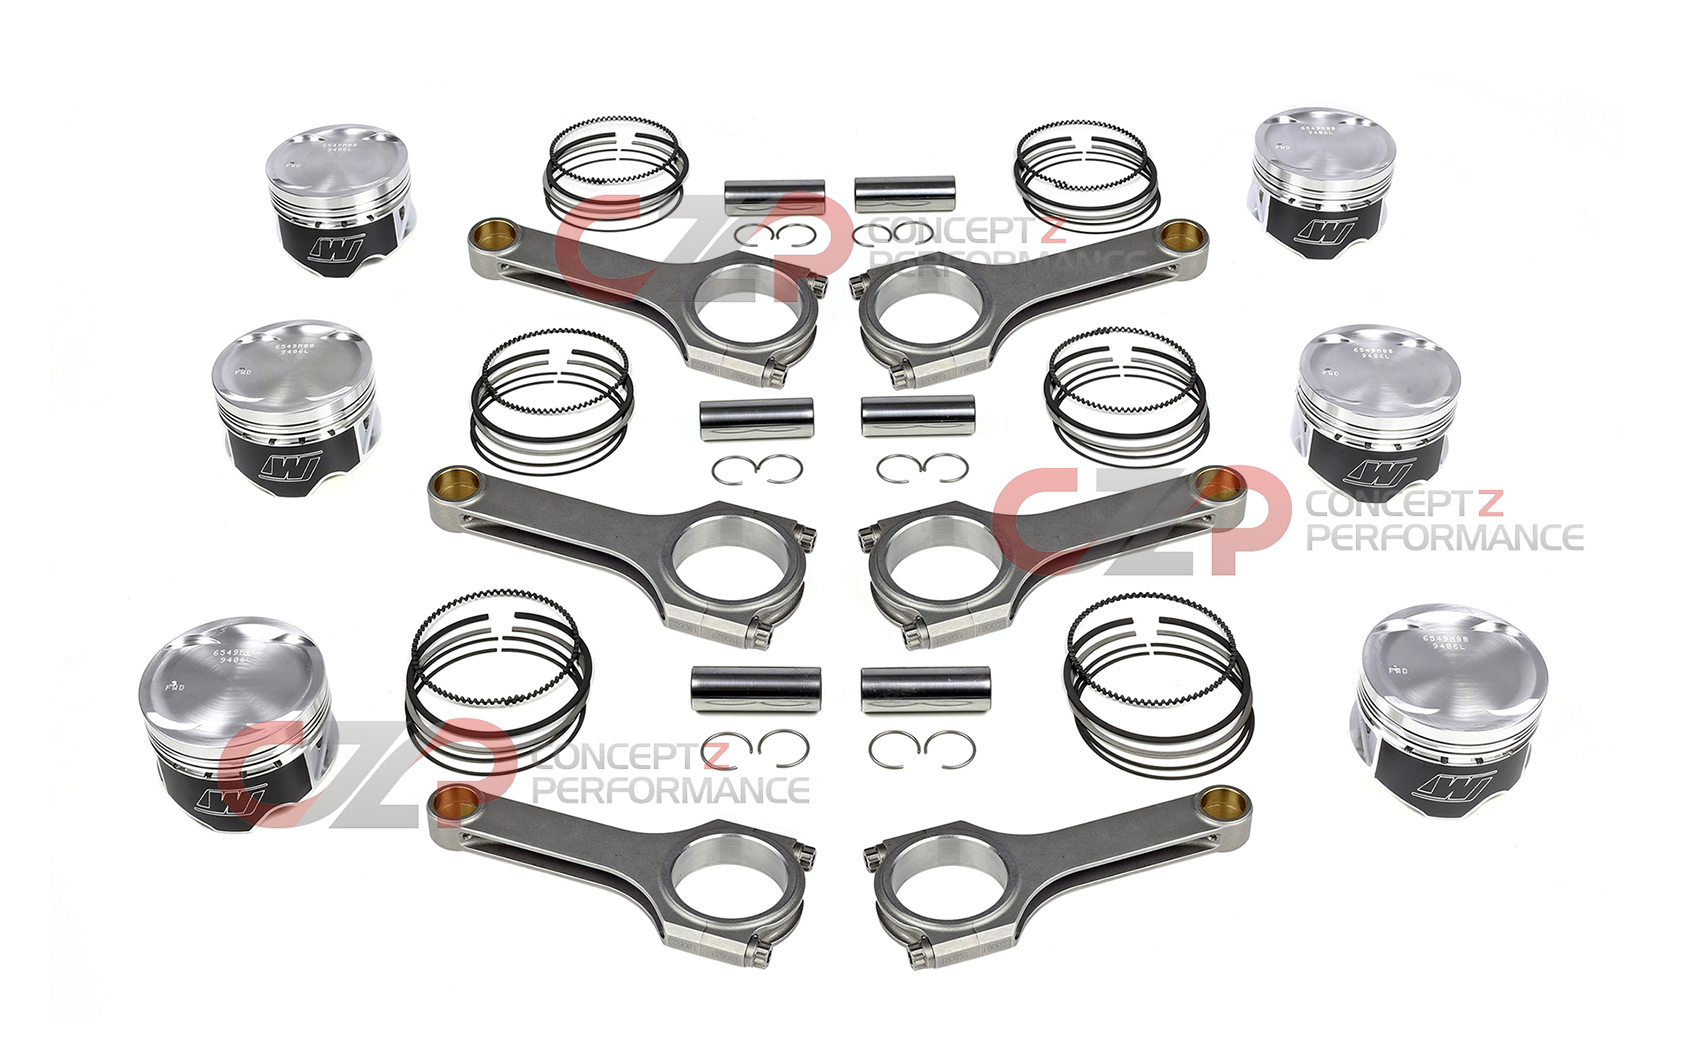 Wiseco Pistons, Brian Crower Sportman Connecting Rods Combo Kit, VQ35HR - Nissan 350Z / Infiniti G35